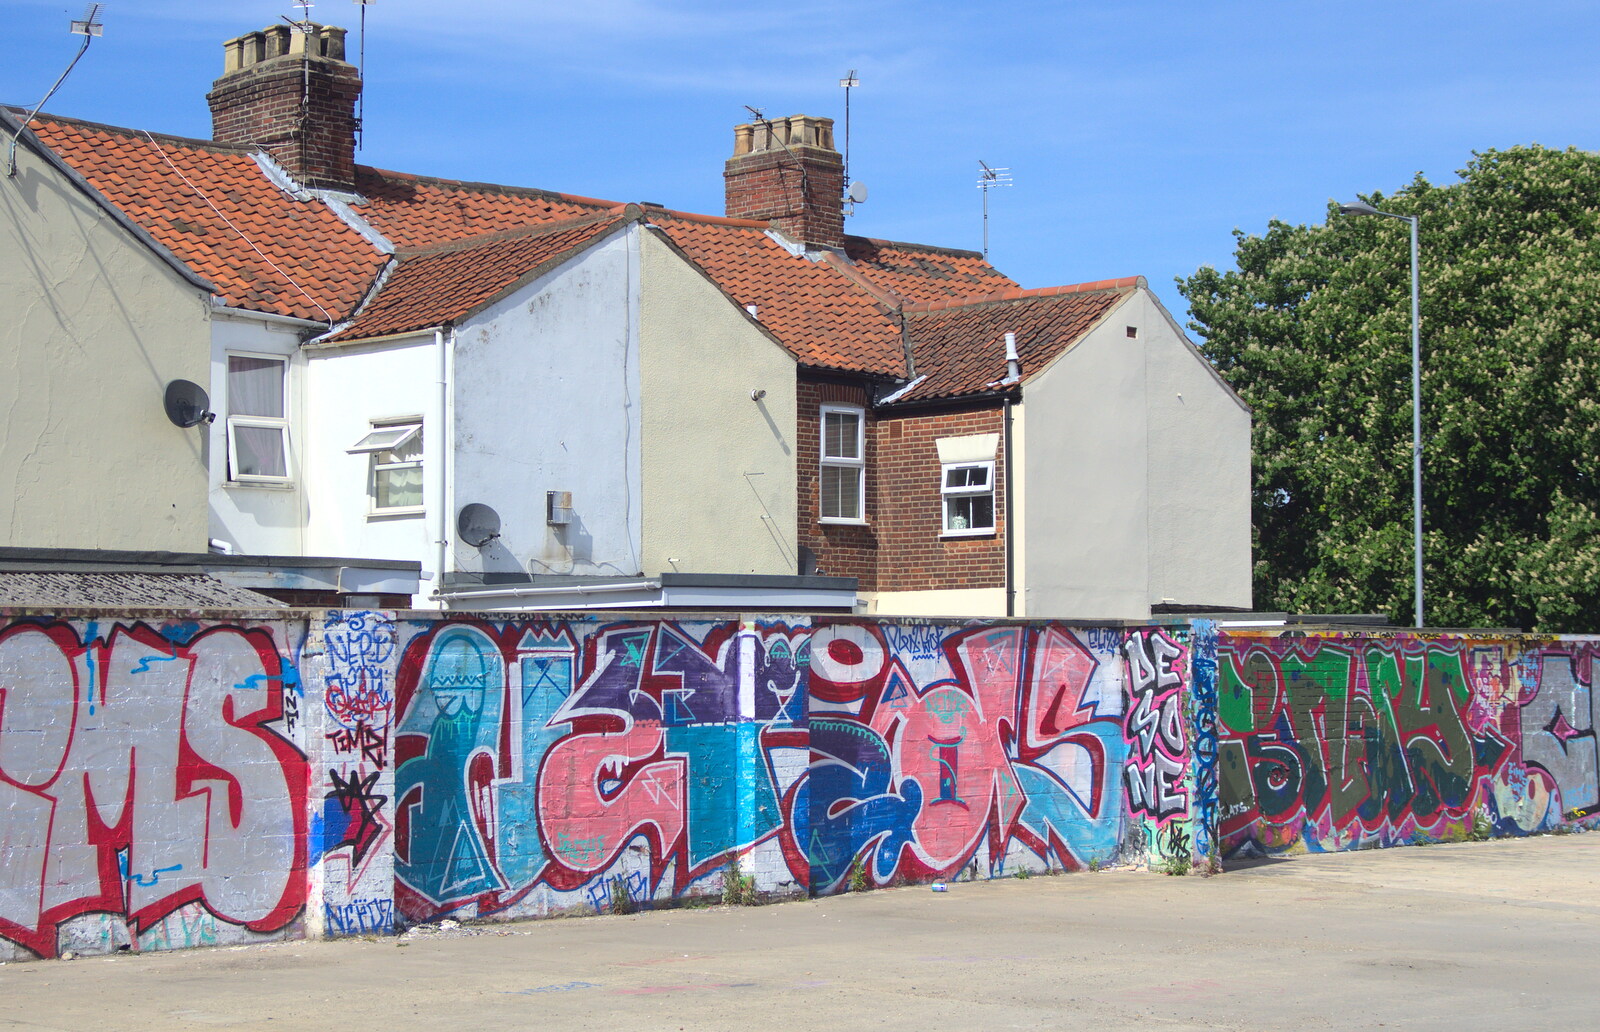 Pink graffiti from The Dereliction of HMSO, Botolph Street, Norwich - 26th May 2013